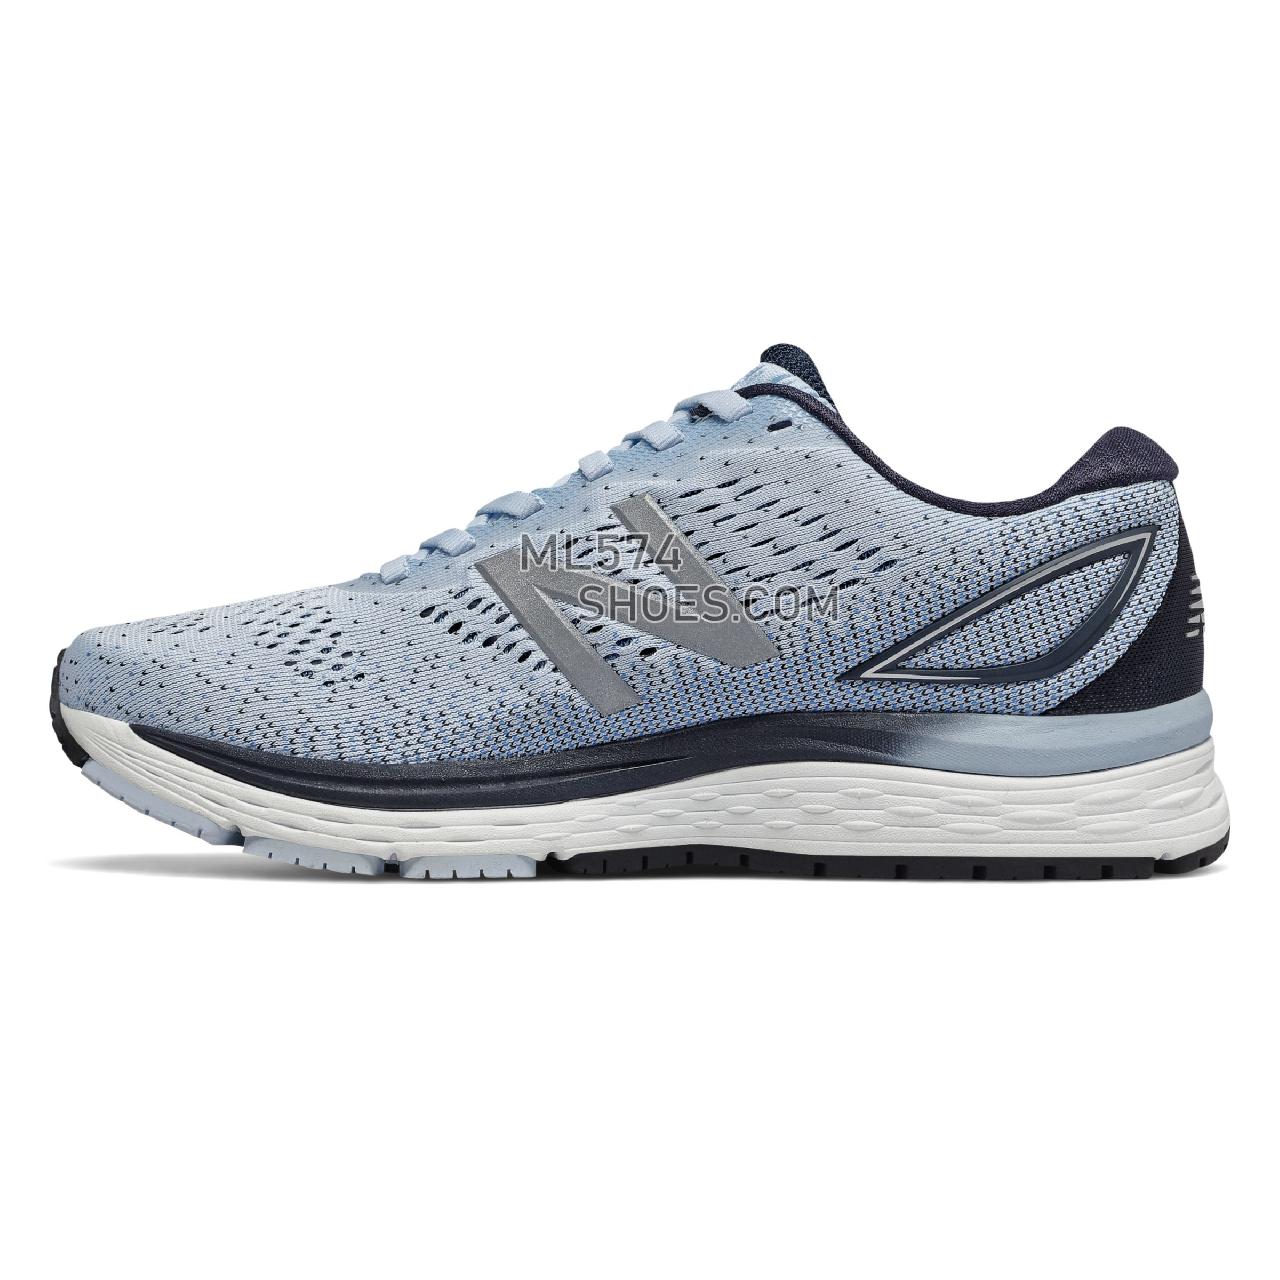 New Balance 880v9 - Women's Neutral Running - Air with Light Cobalt and Reflection - W880AB9